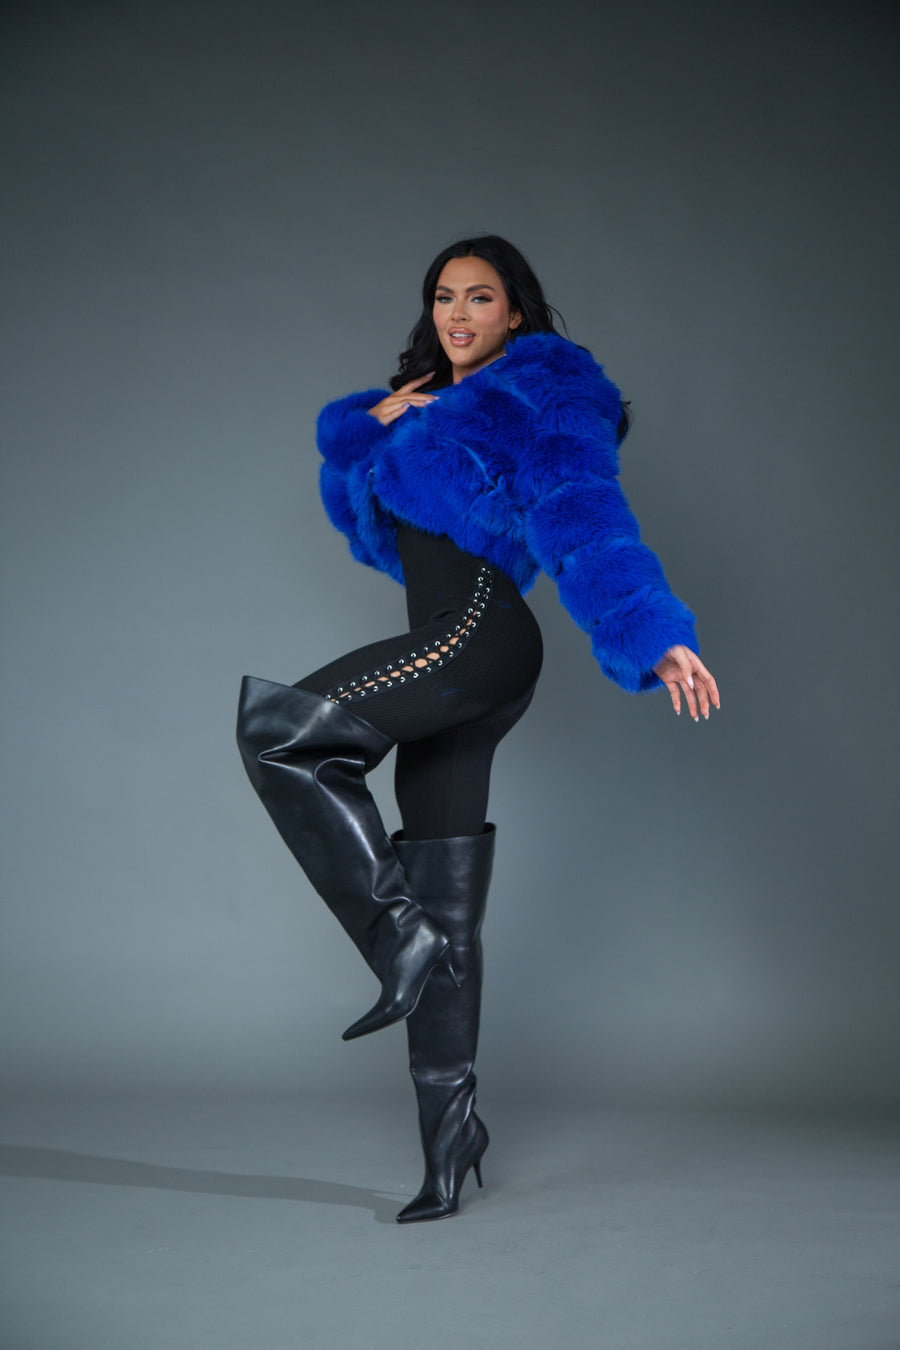 model posing while wearing flared pointed toe stiletto knee high boots